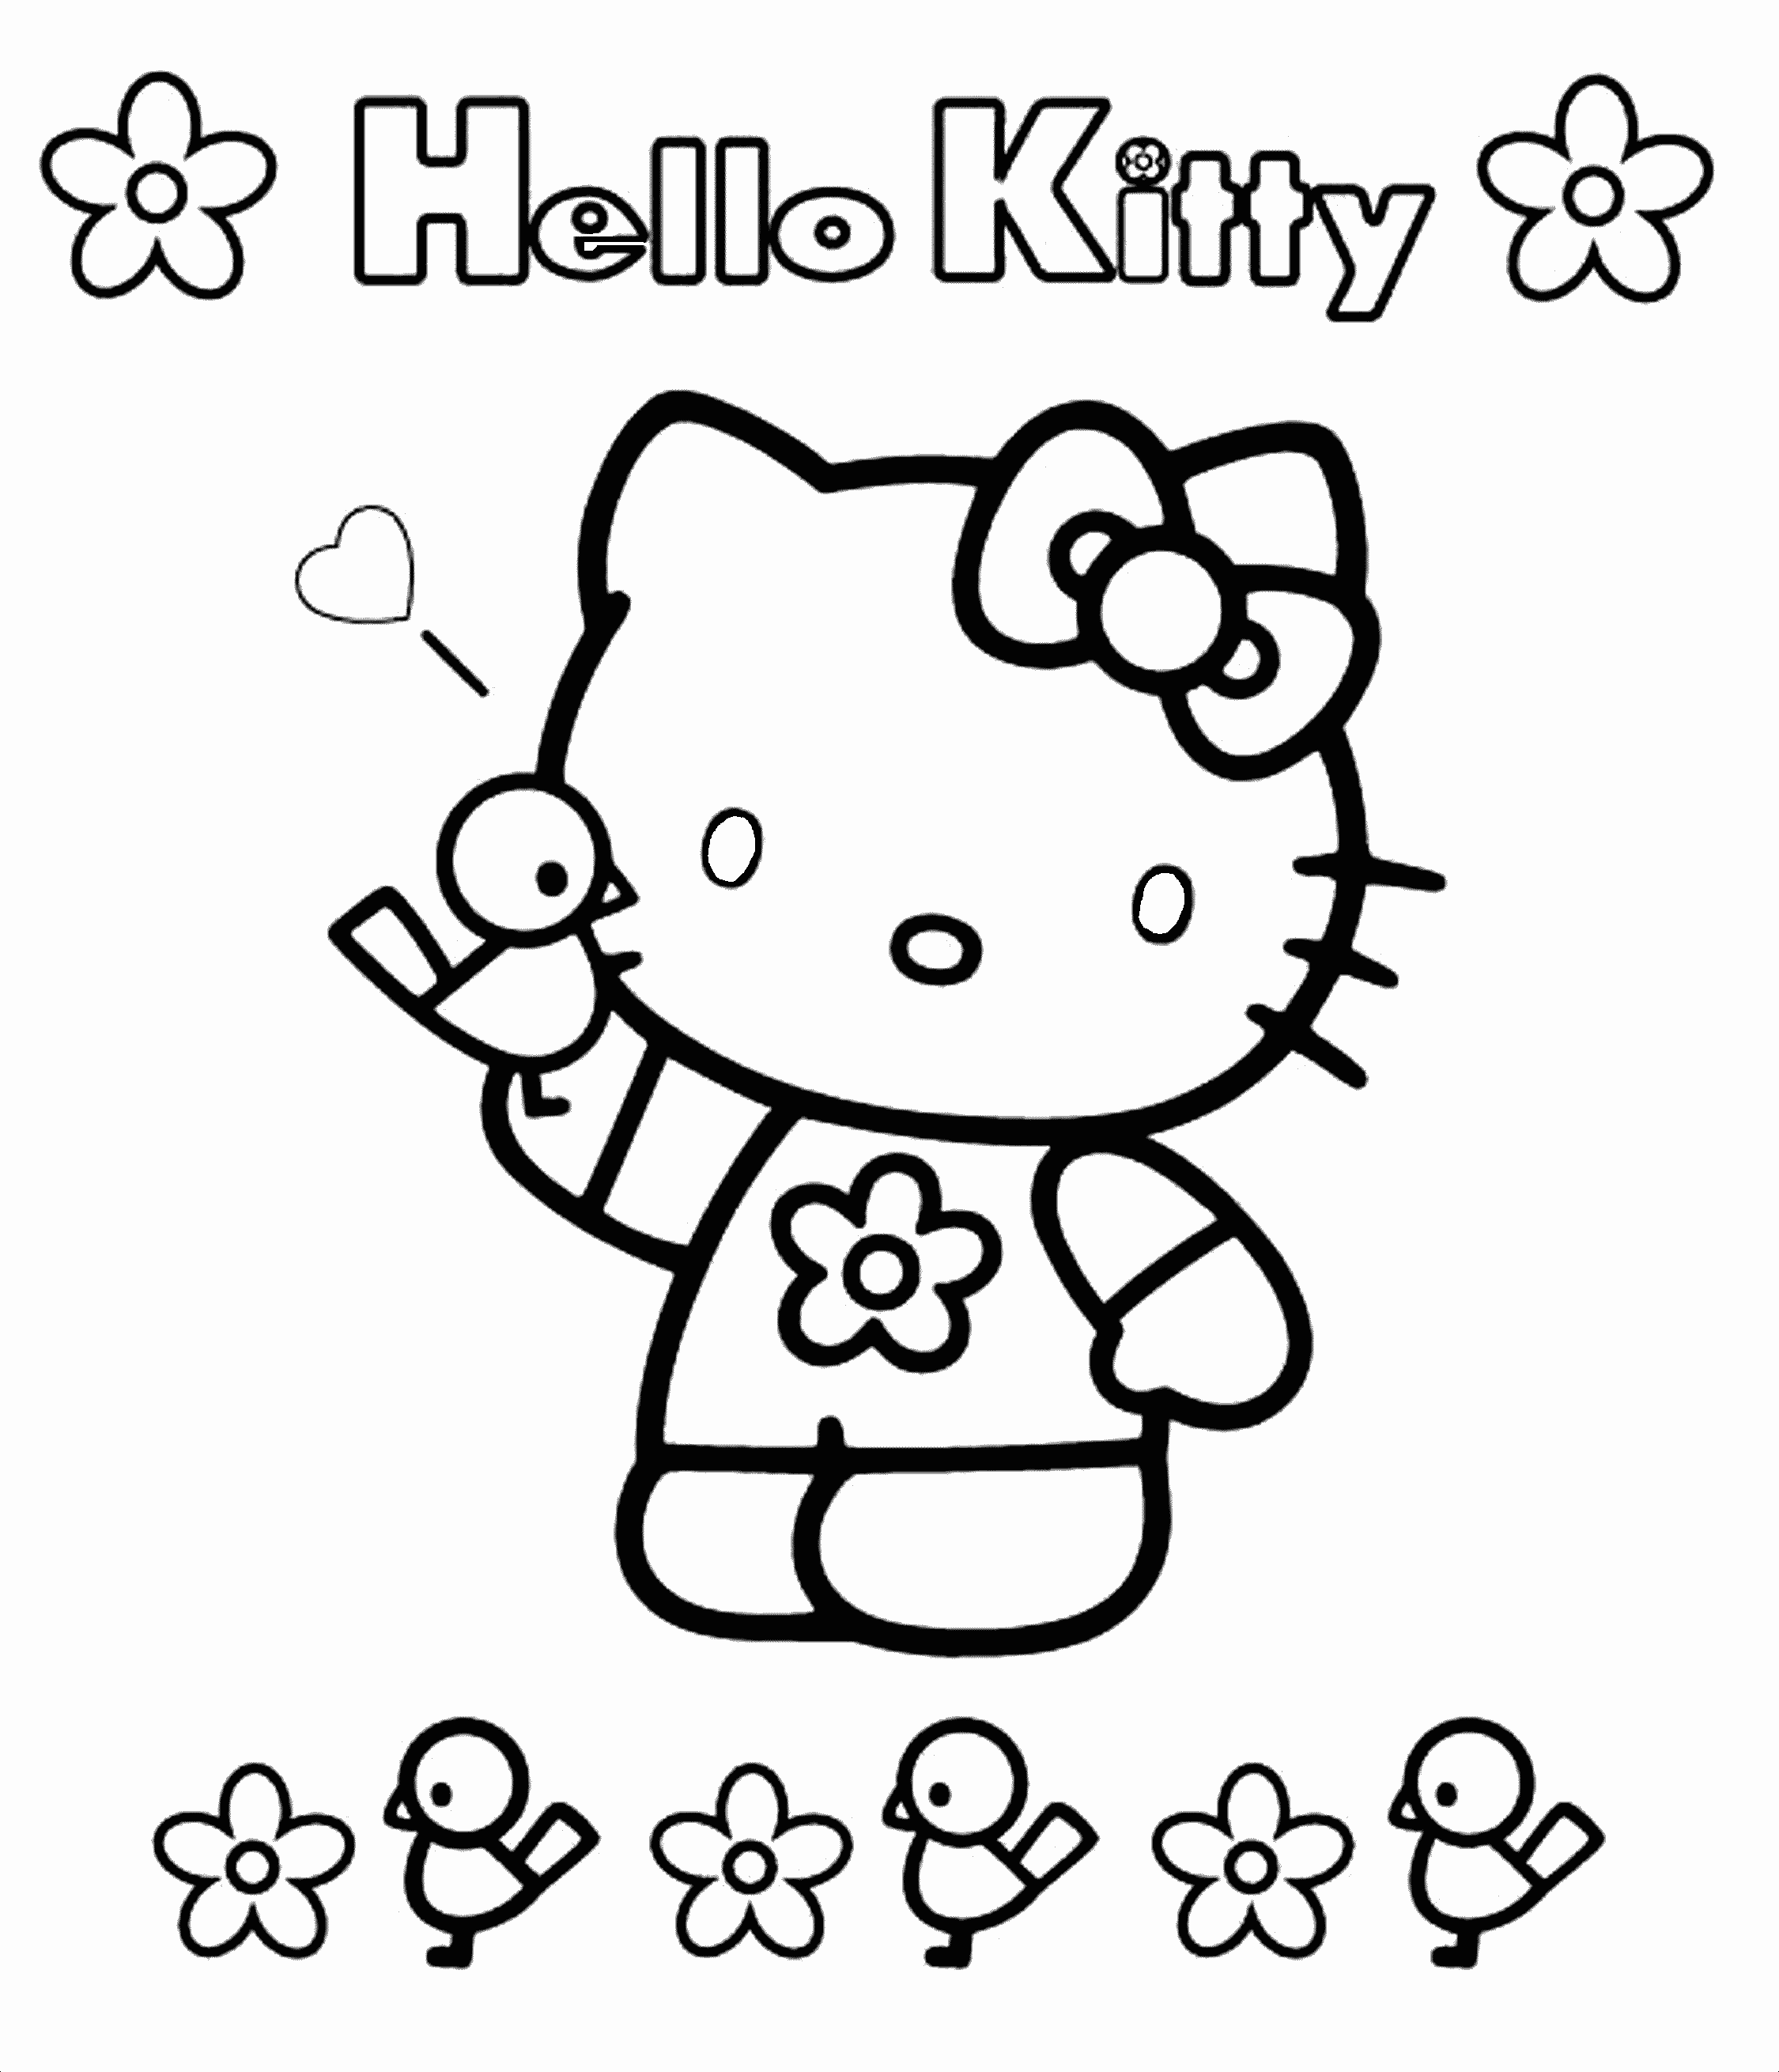 coloring pages of hello kitty hello kitty coloring pages lets coloring pages kitty coloring hello of 